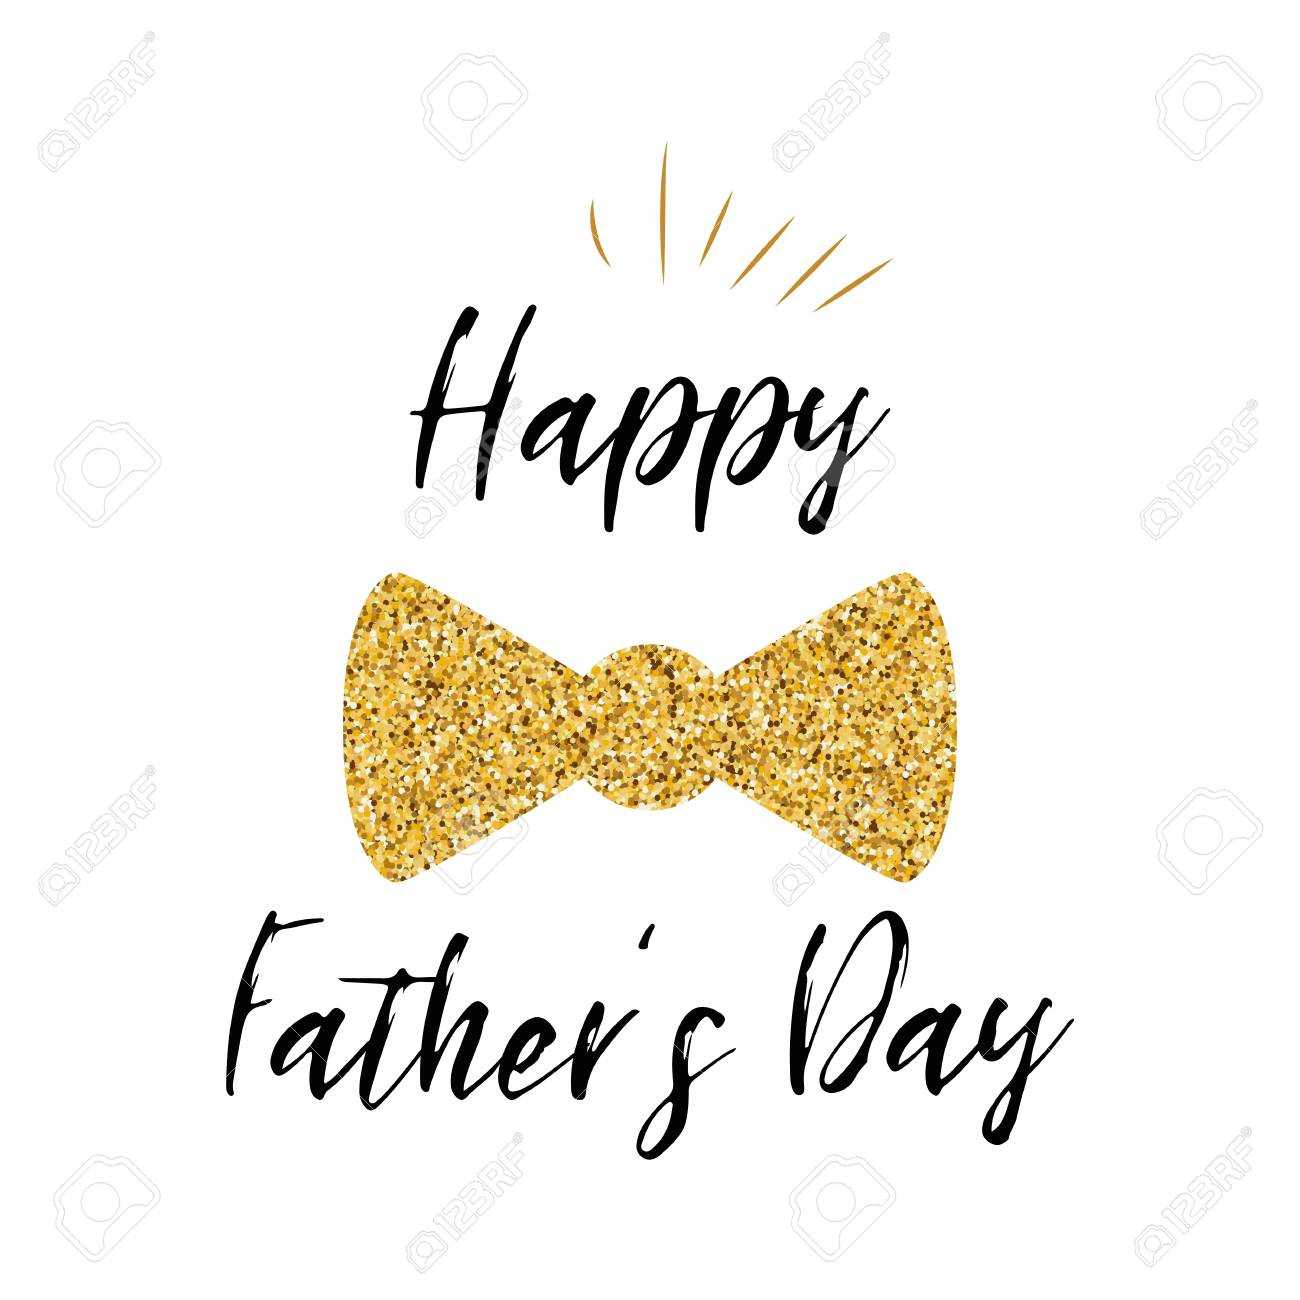 Father's Day Banner Design With Lettering, Golden Bow Tie Butterfly With Tie Banner Template